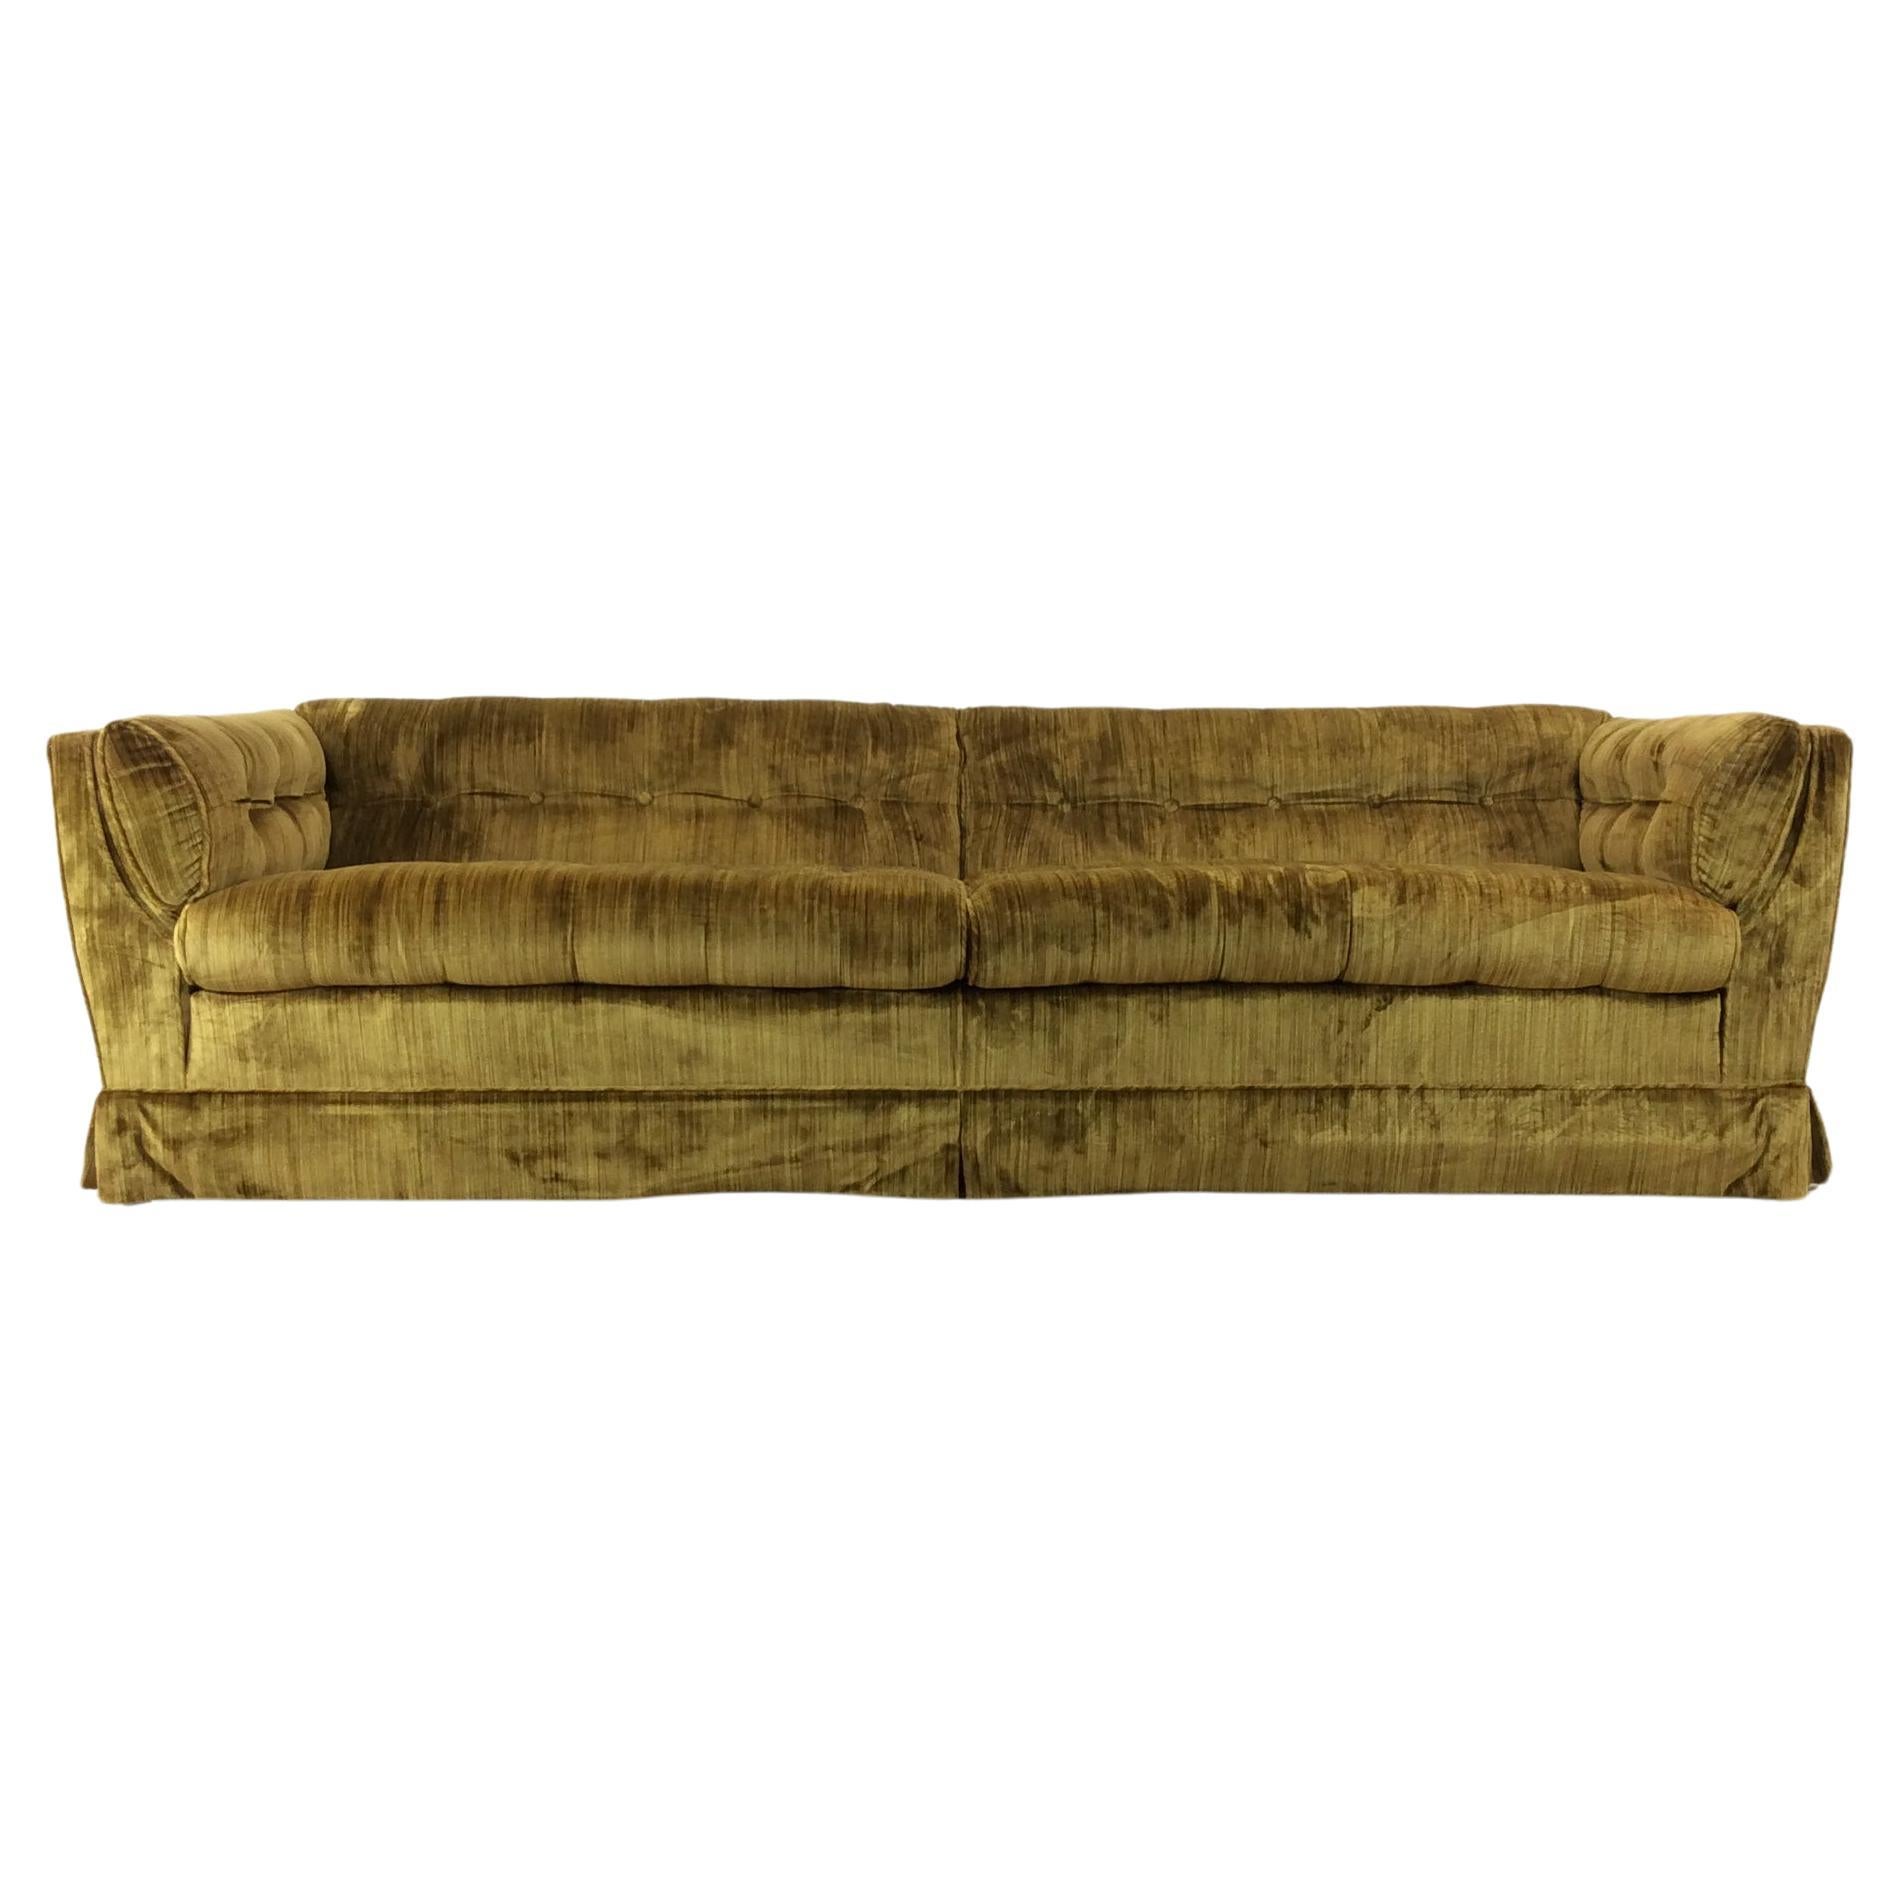 Mid Century Modern Long Sofa with Green Tufted Upholstery